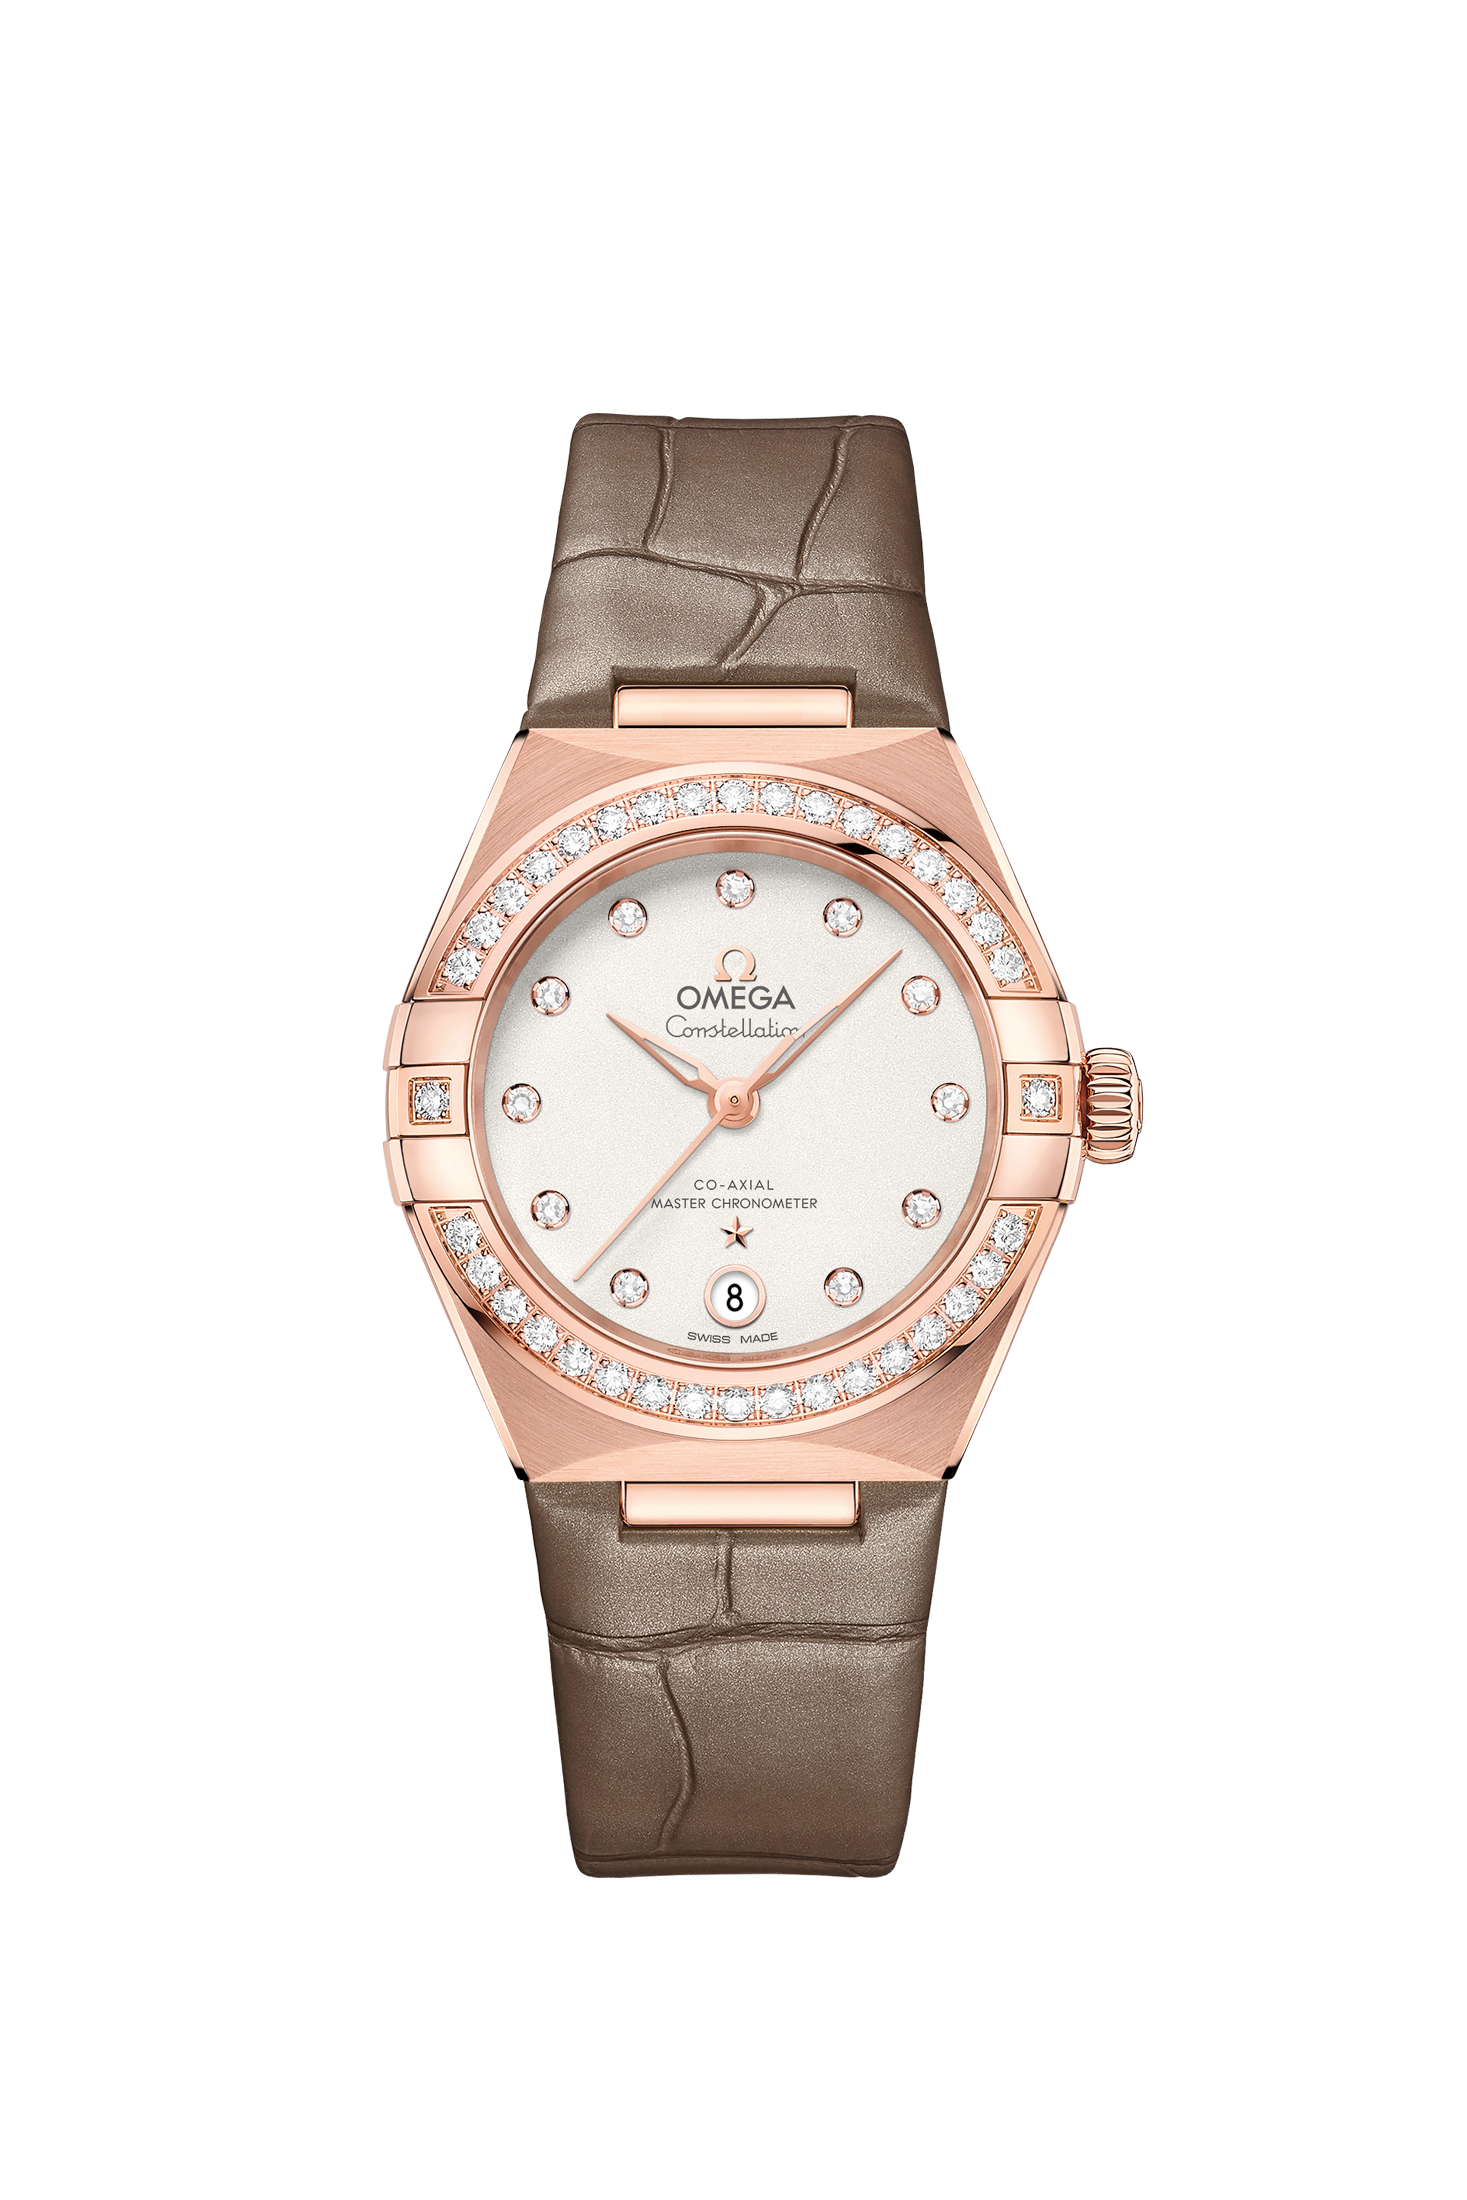 Ladies' watch  OMEGA, Constellation Co Axial Master Chronometer / 29mm, SKU: 131.58.29.20.52.002 | watchphilosophy.co.uk